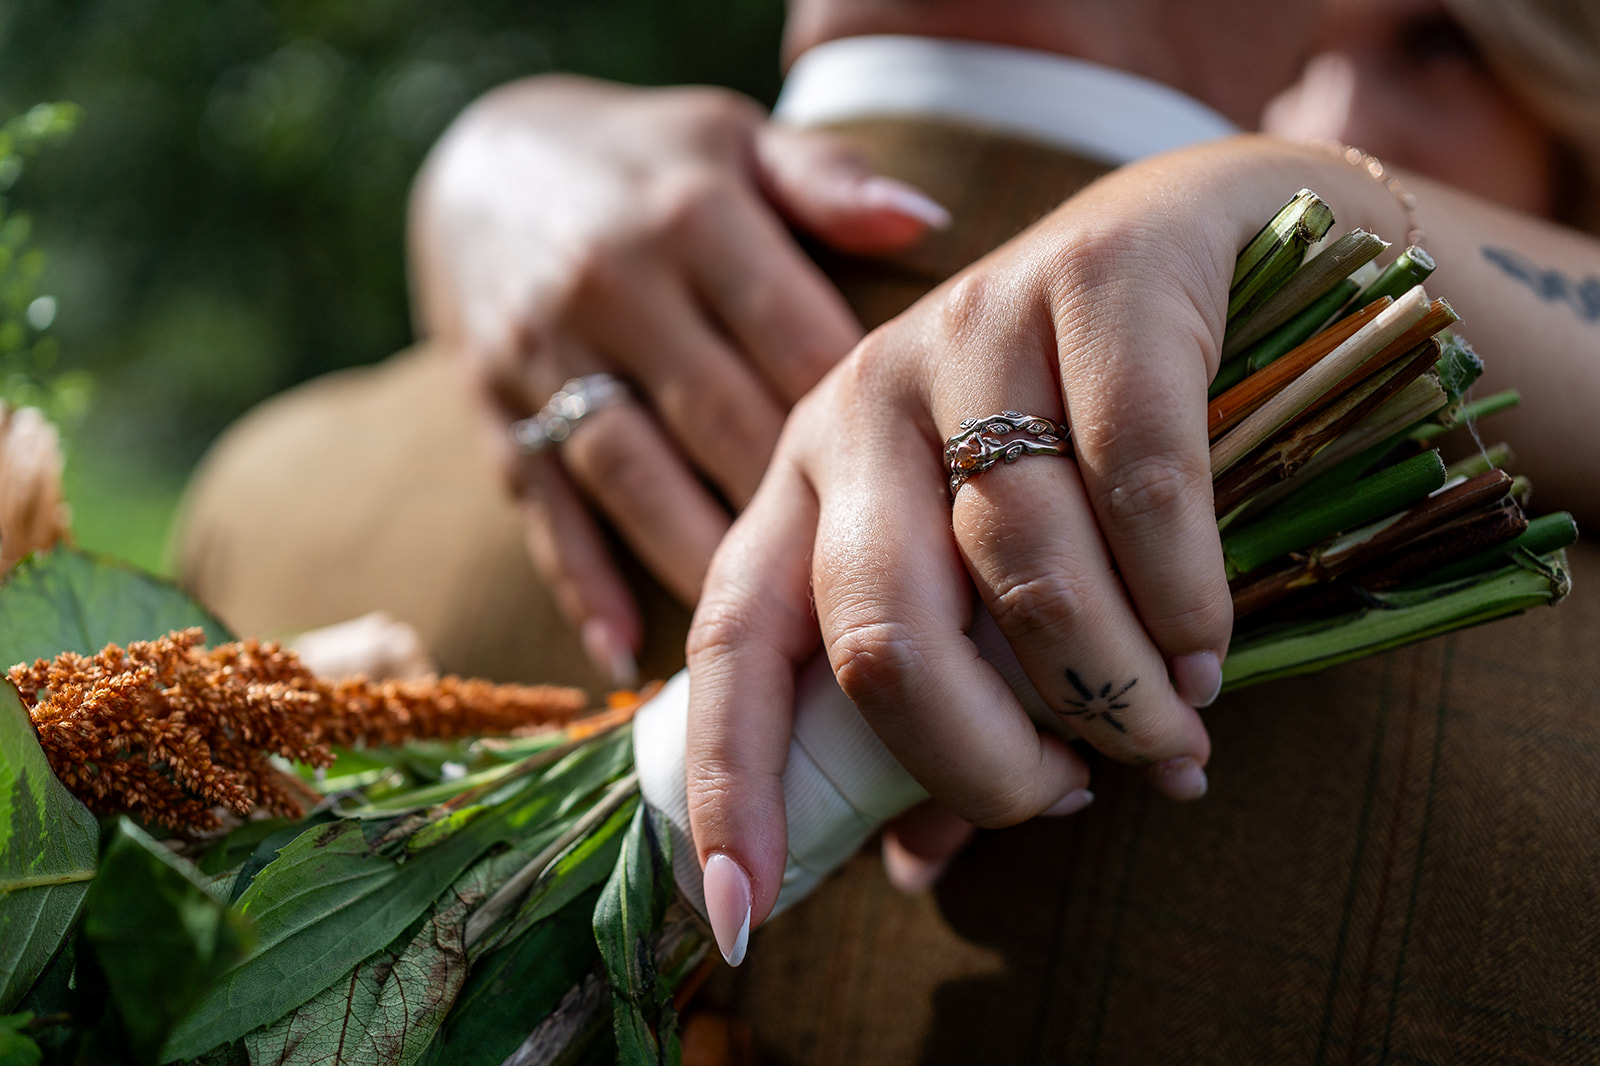 Close up shot of hand holding flowers with wedding ring visible